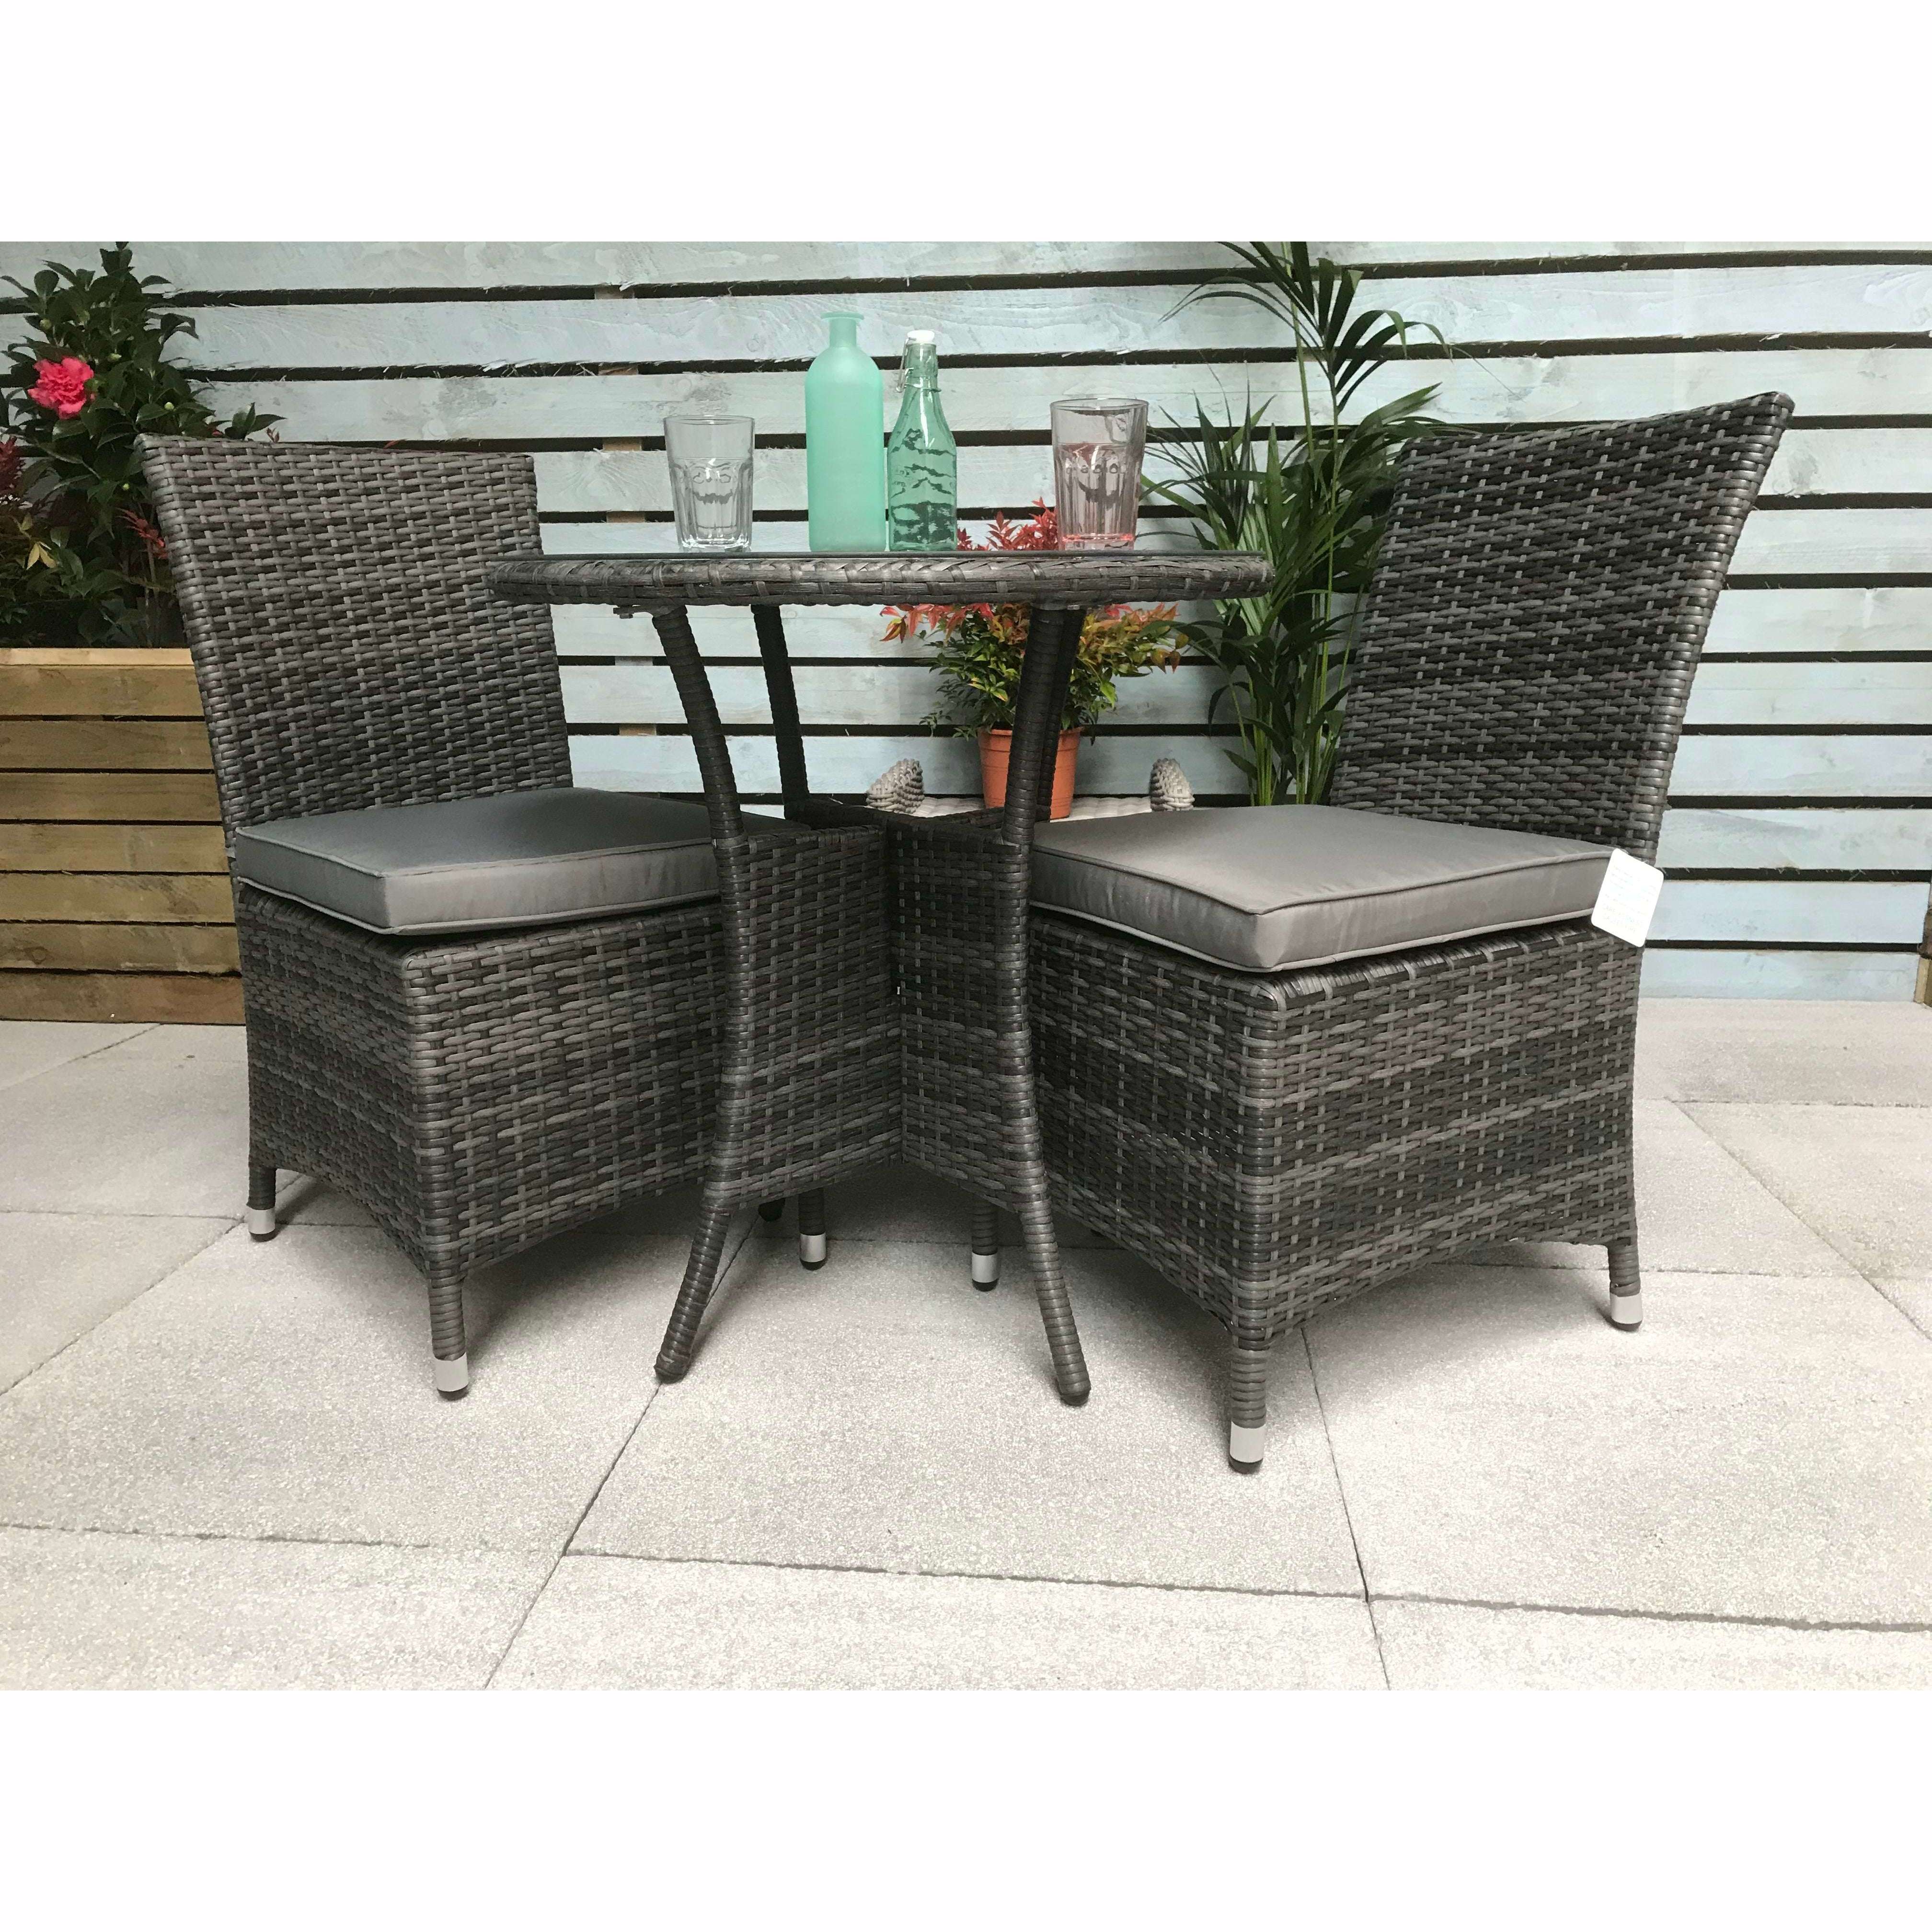 Exceptional Garden:Signature Weave Emily 2-Seater Bistro Set Armless Chairs